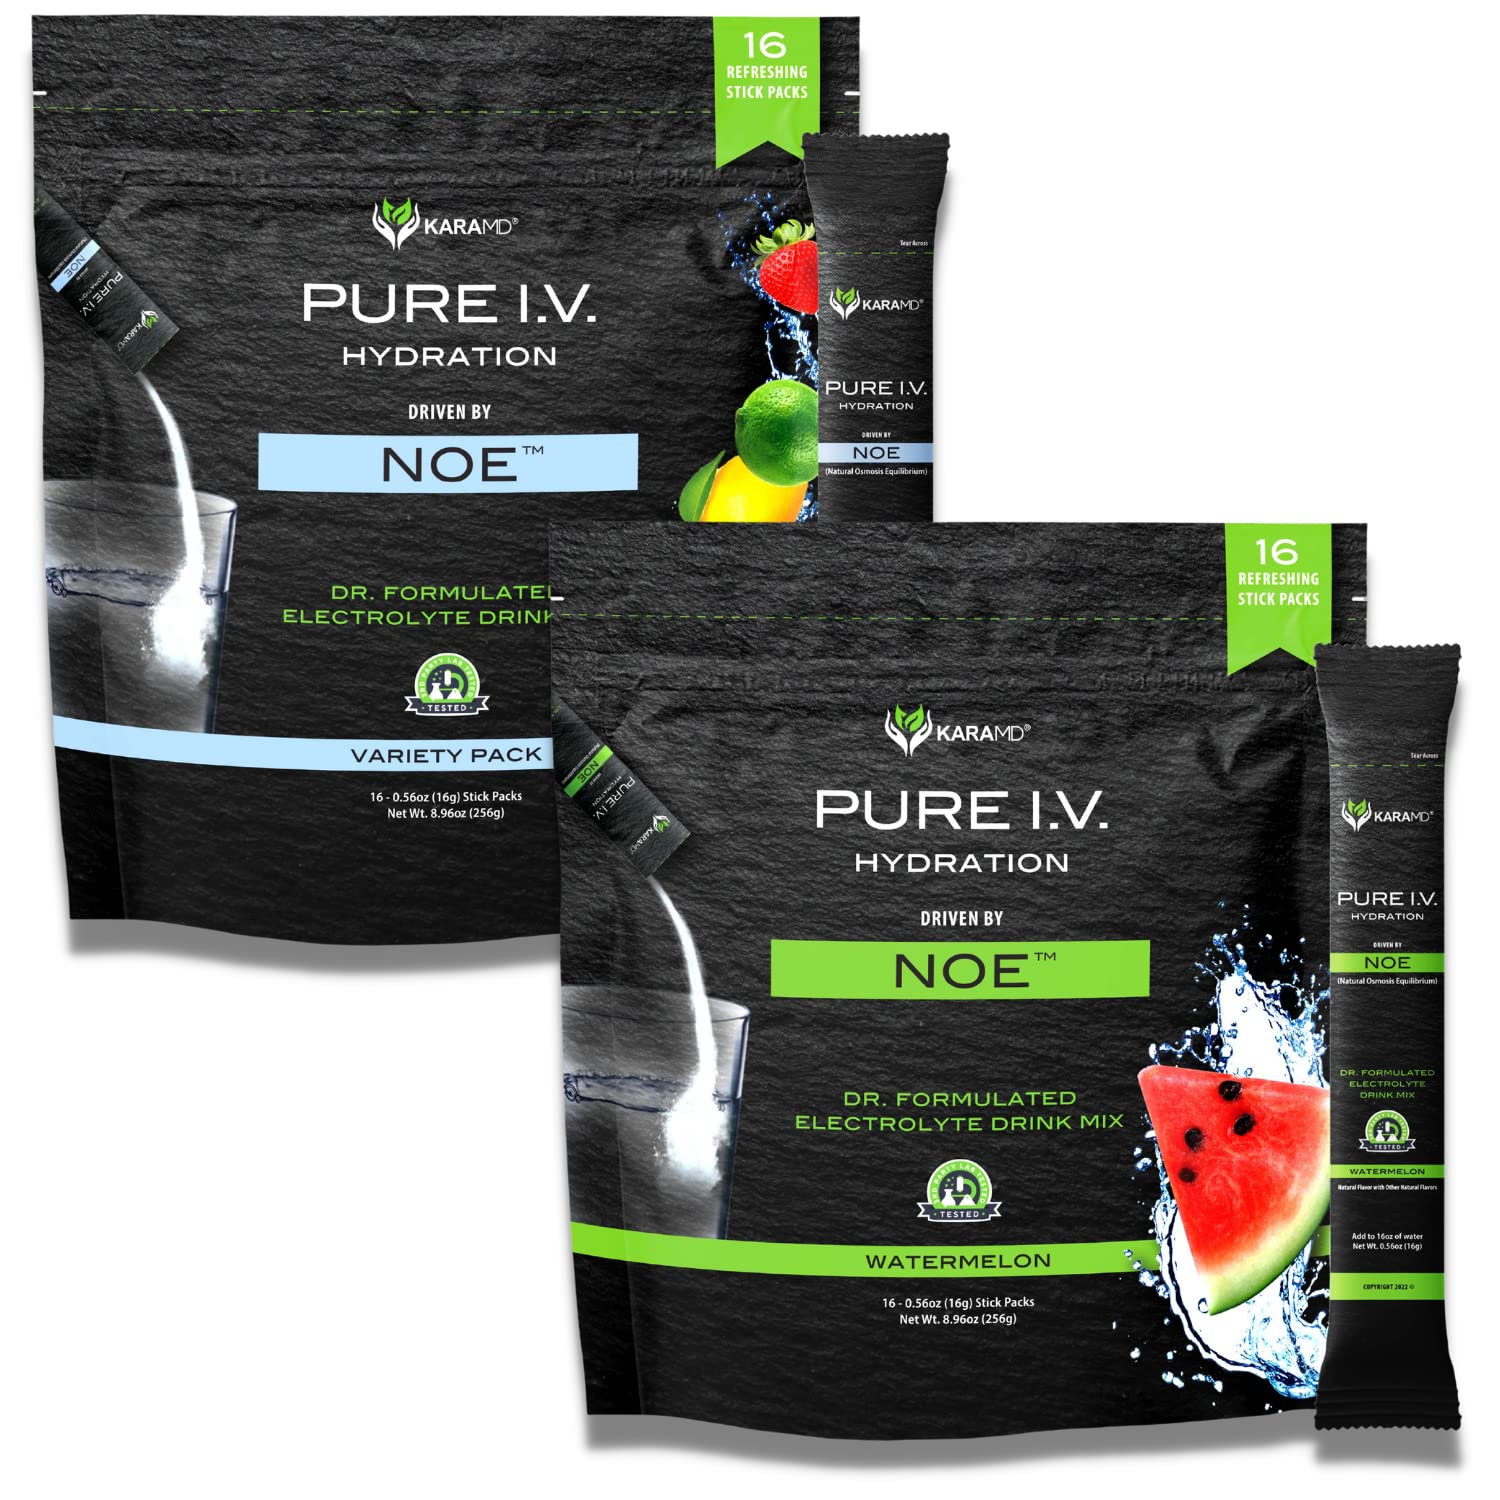 KaraMD Pure I.V. - Doctor Formulated Electrolyte Powder Drink Mix 2 Flavor Bundle ? Refreshing & Delicious Hydrating Packets with Vitamins & Minerals ? 1 Variety Bag & 1 Watermelon Bag (32 Sticks)